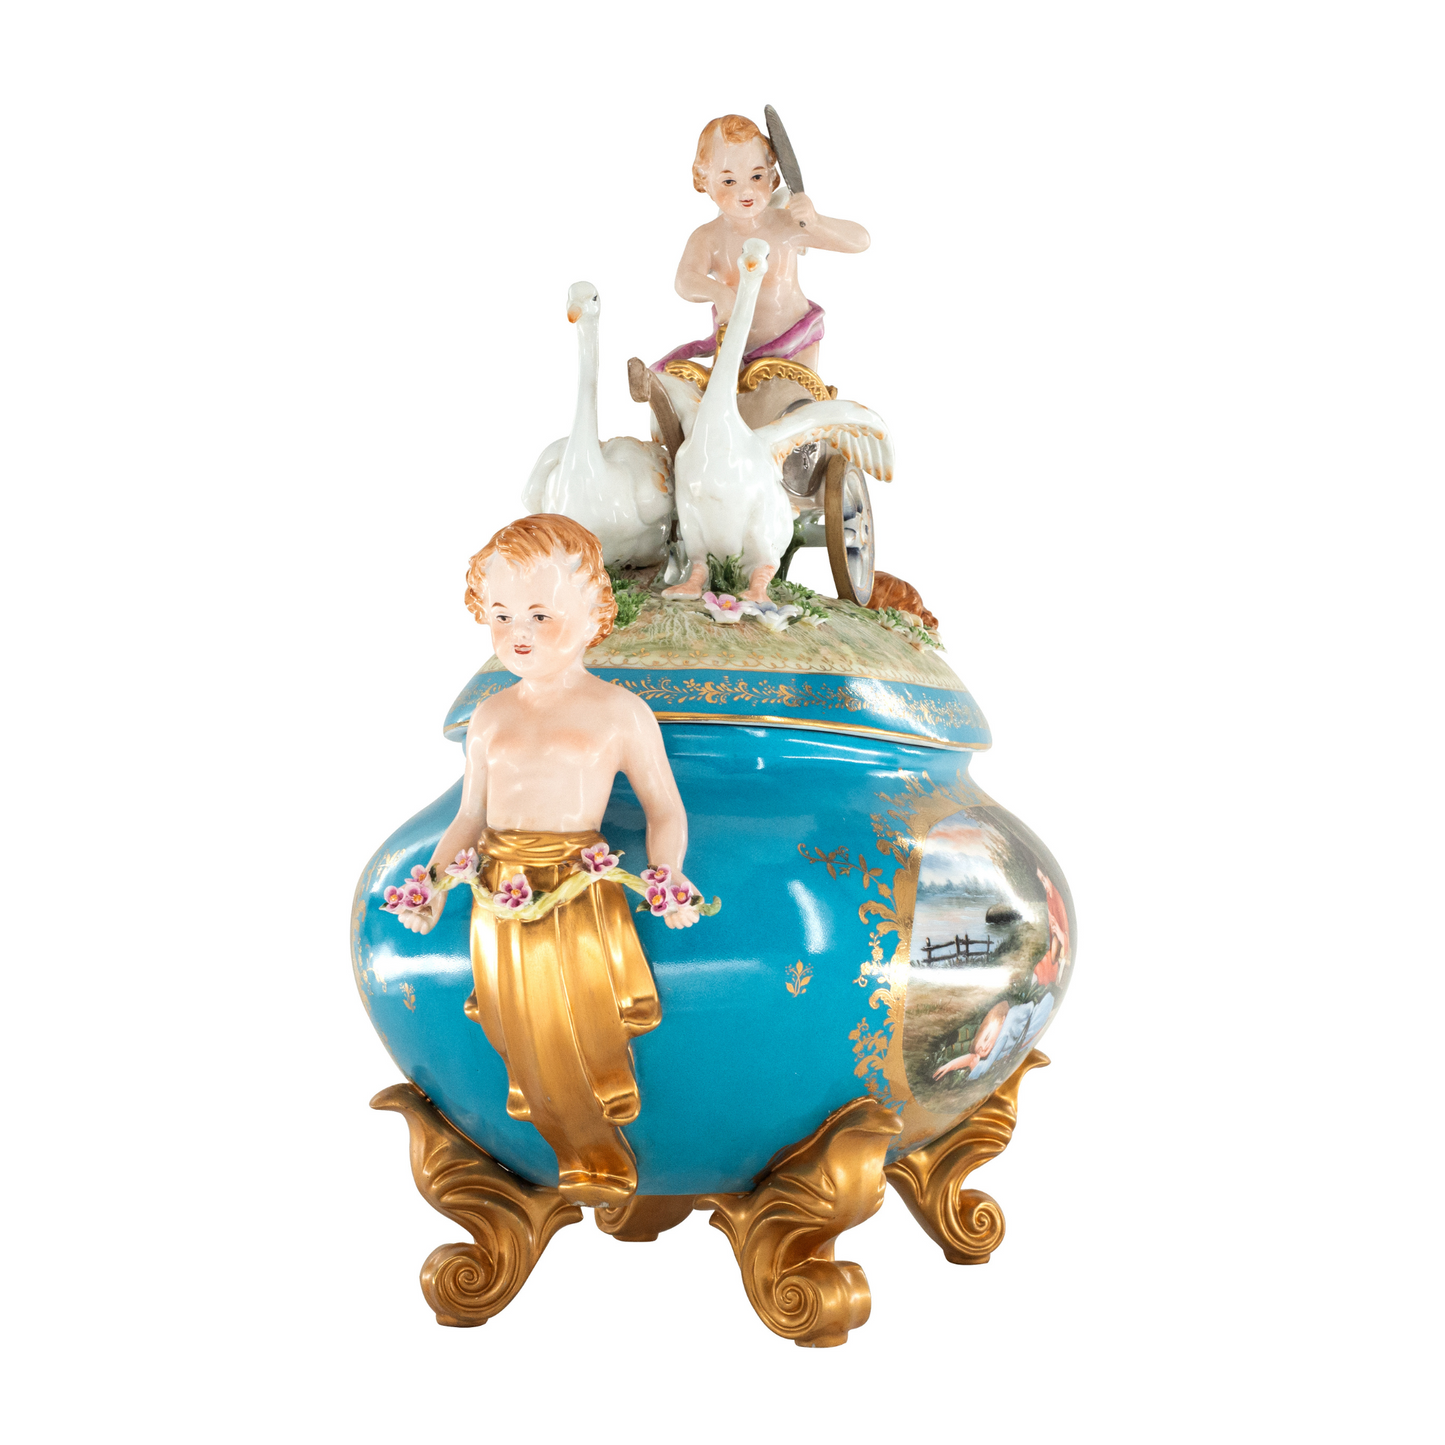 Exceptional Hand-Painted Baroque Style Covered Porcelain Cherub Jar